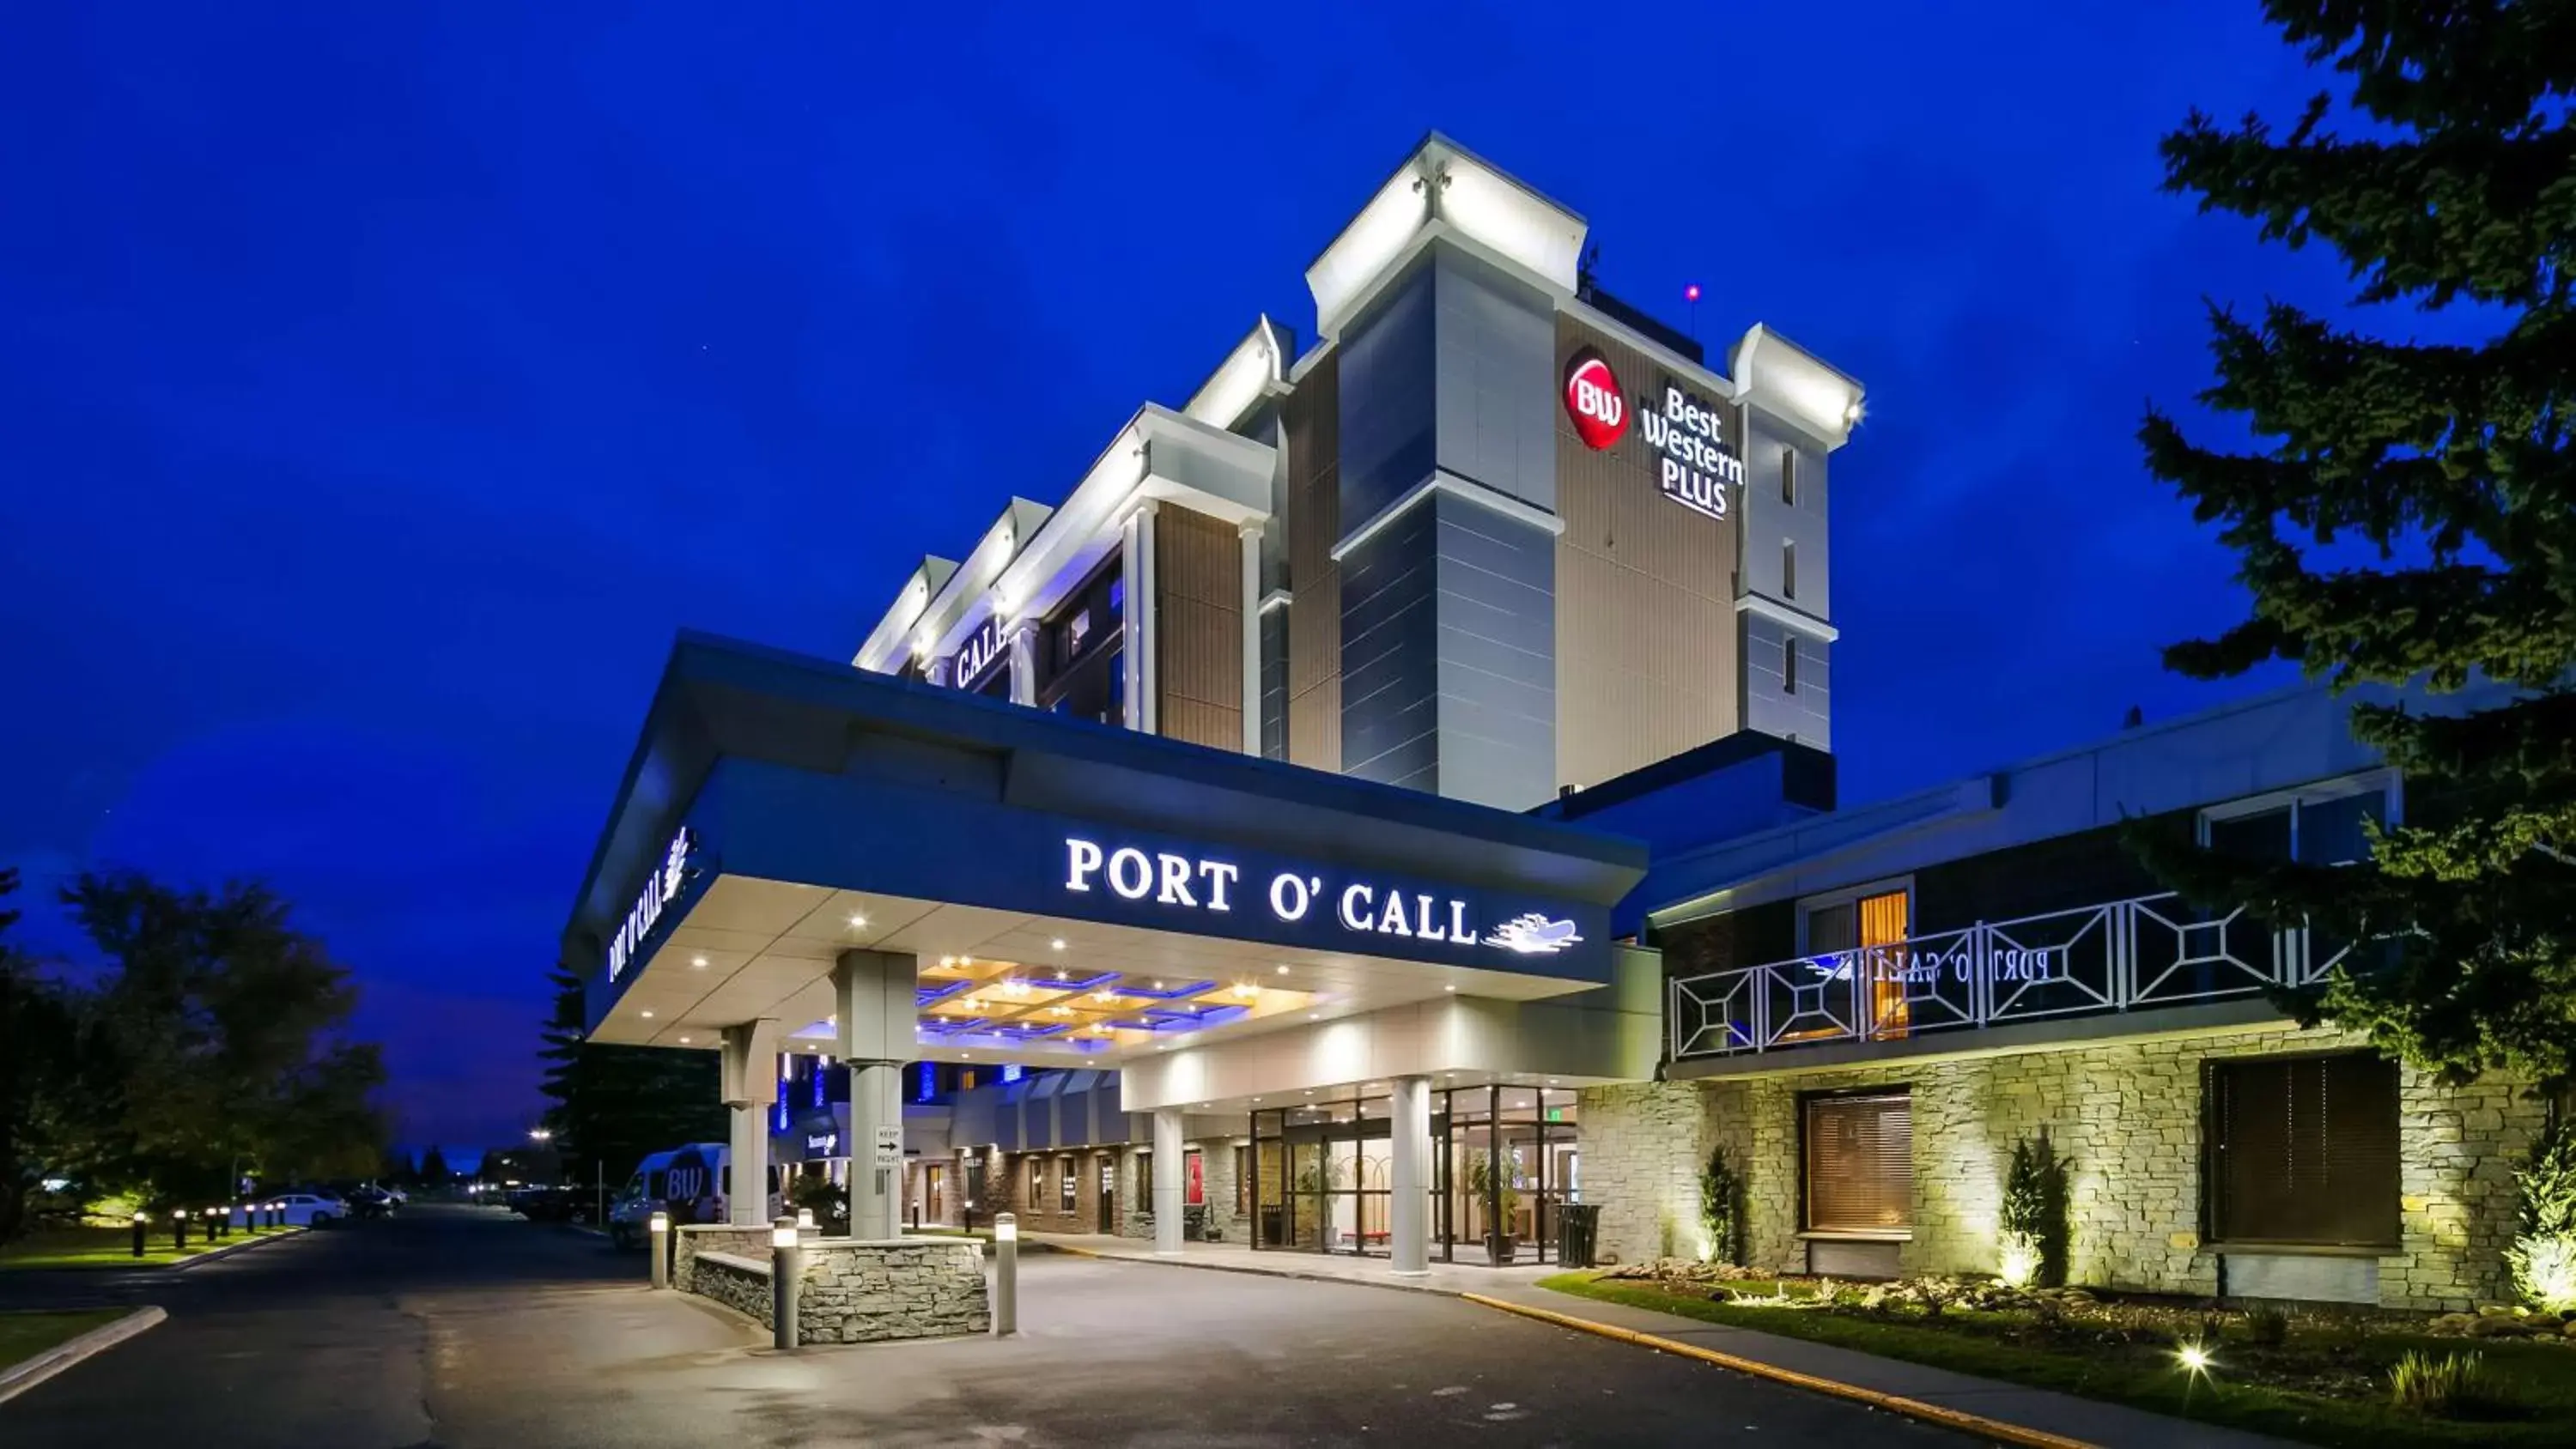 Property Building in Best Western PLUS Port O'Call Hotel